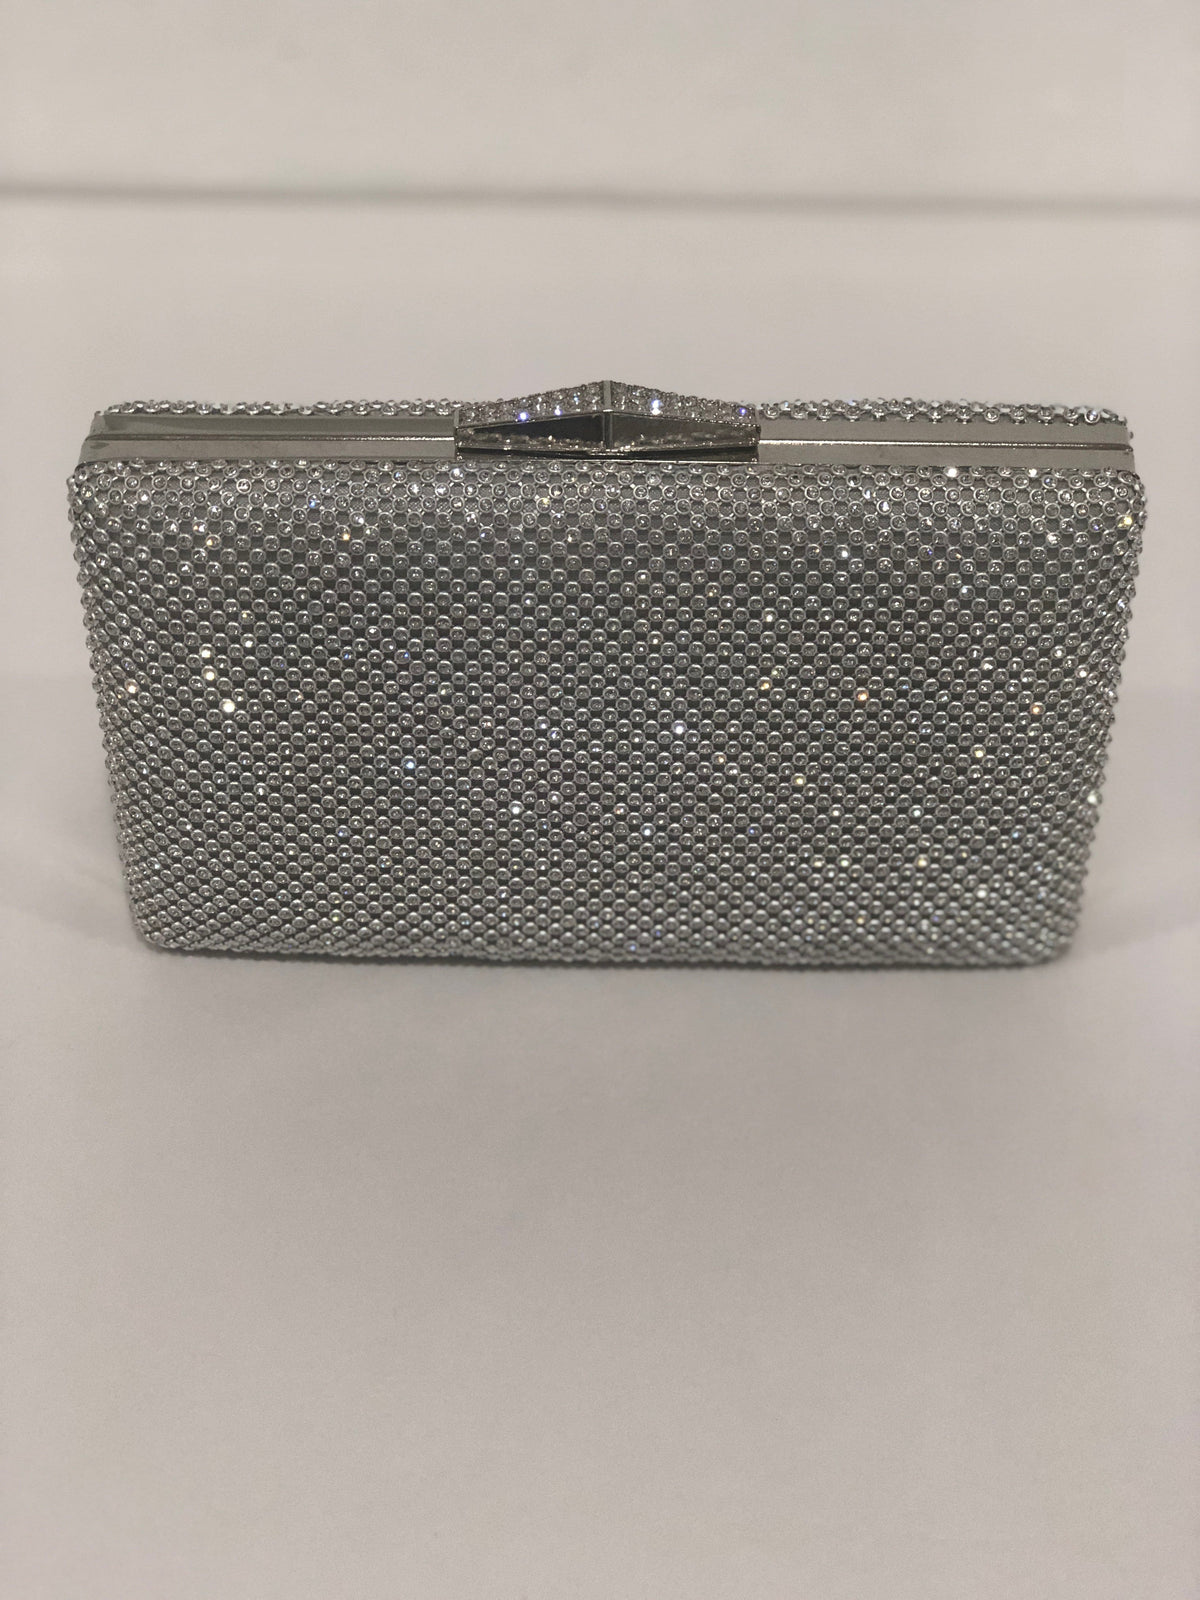 Hand Picked By Dressxox Accessories One Size Diamante Silver Evening Clutch